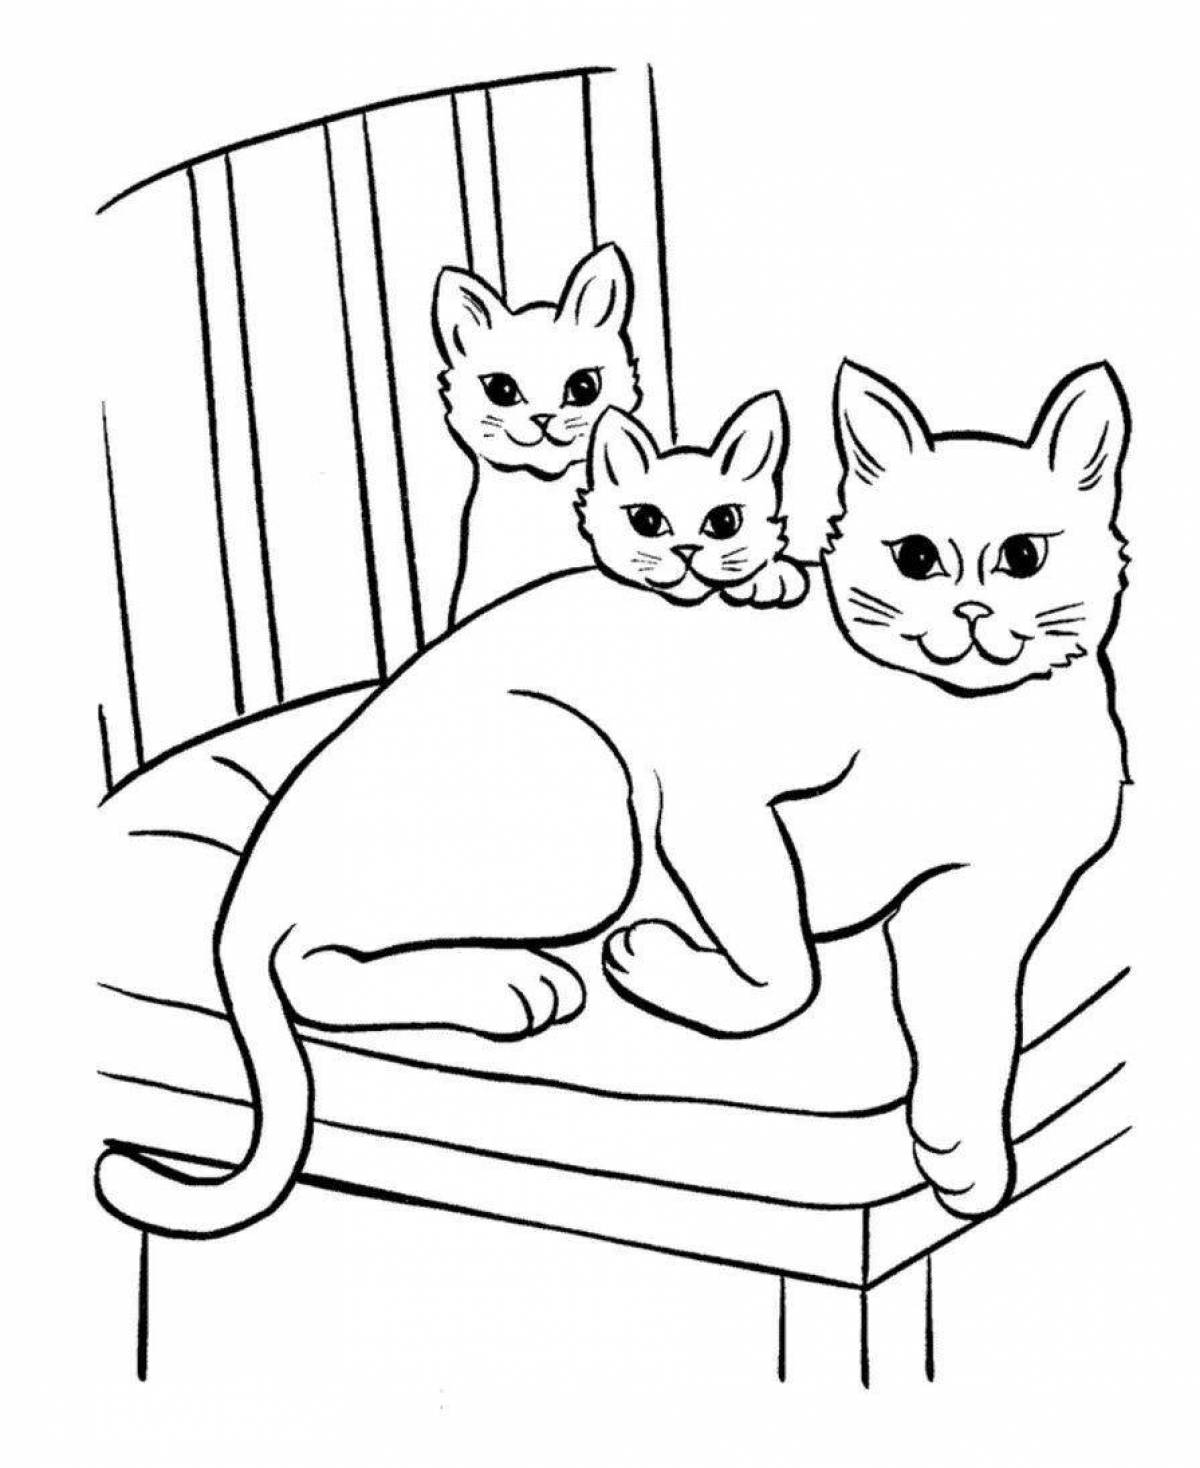 Cosy cat coloring page